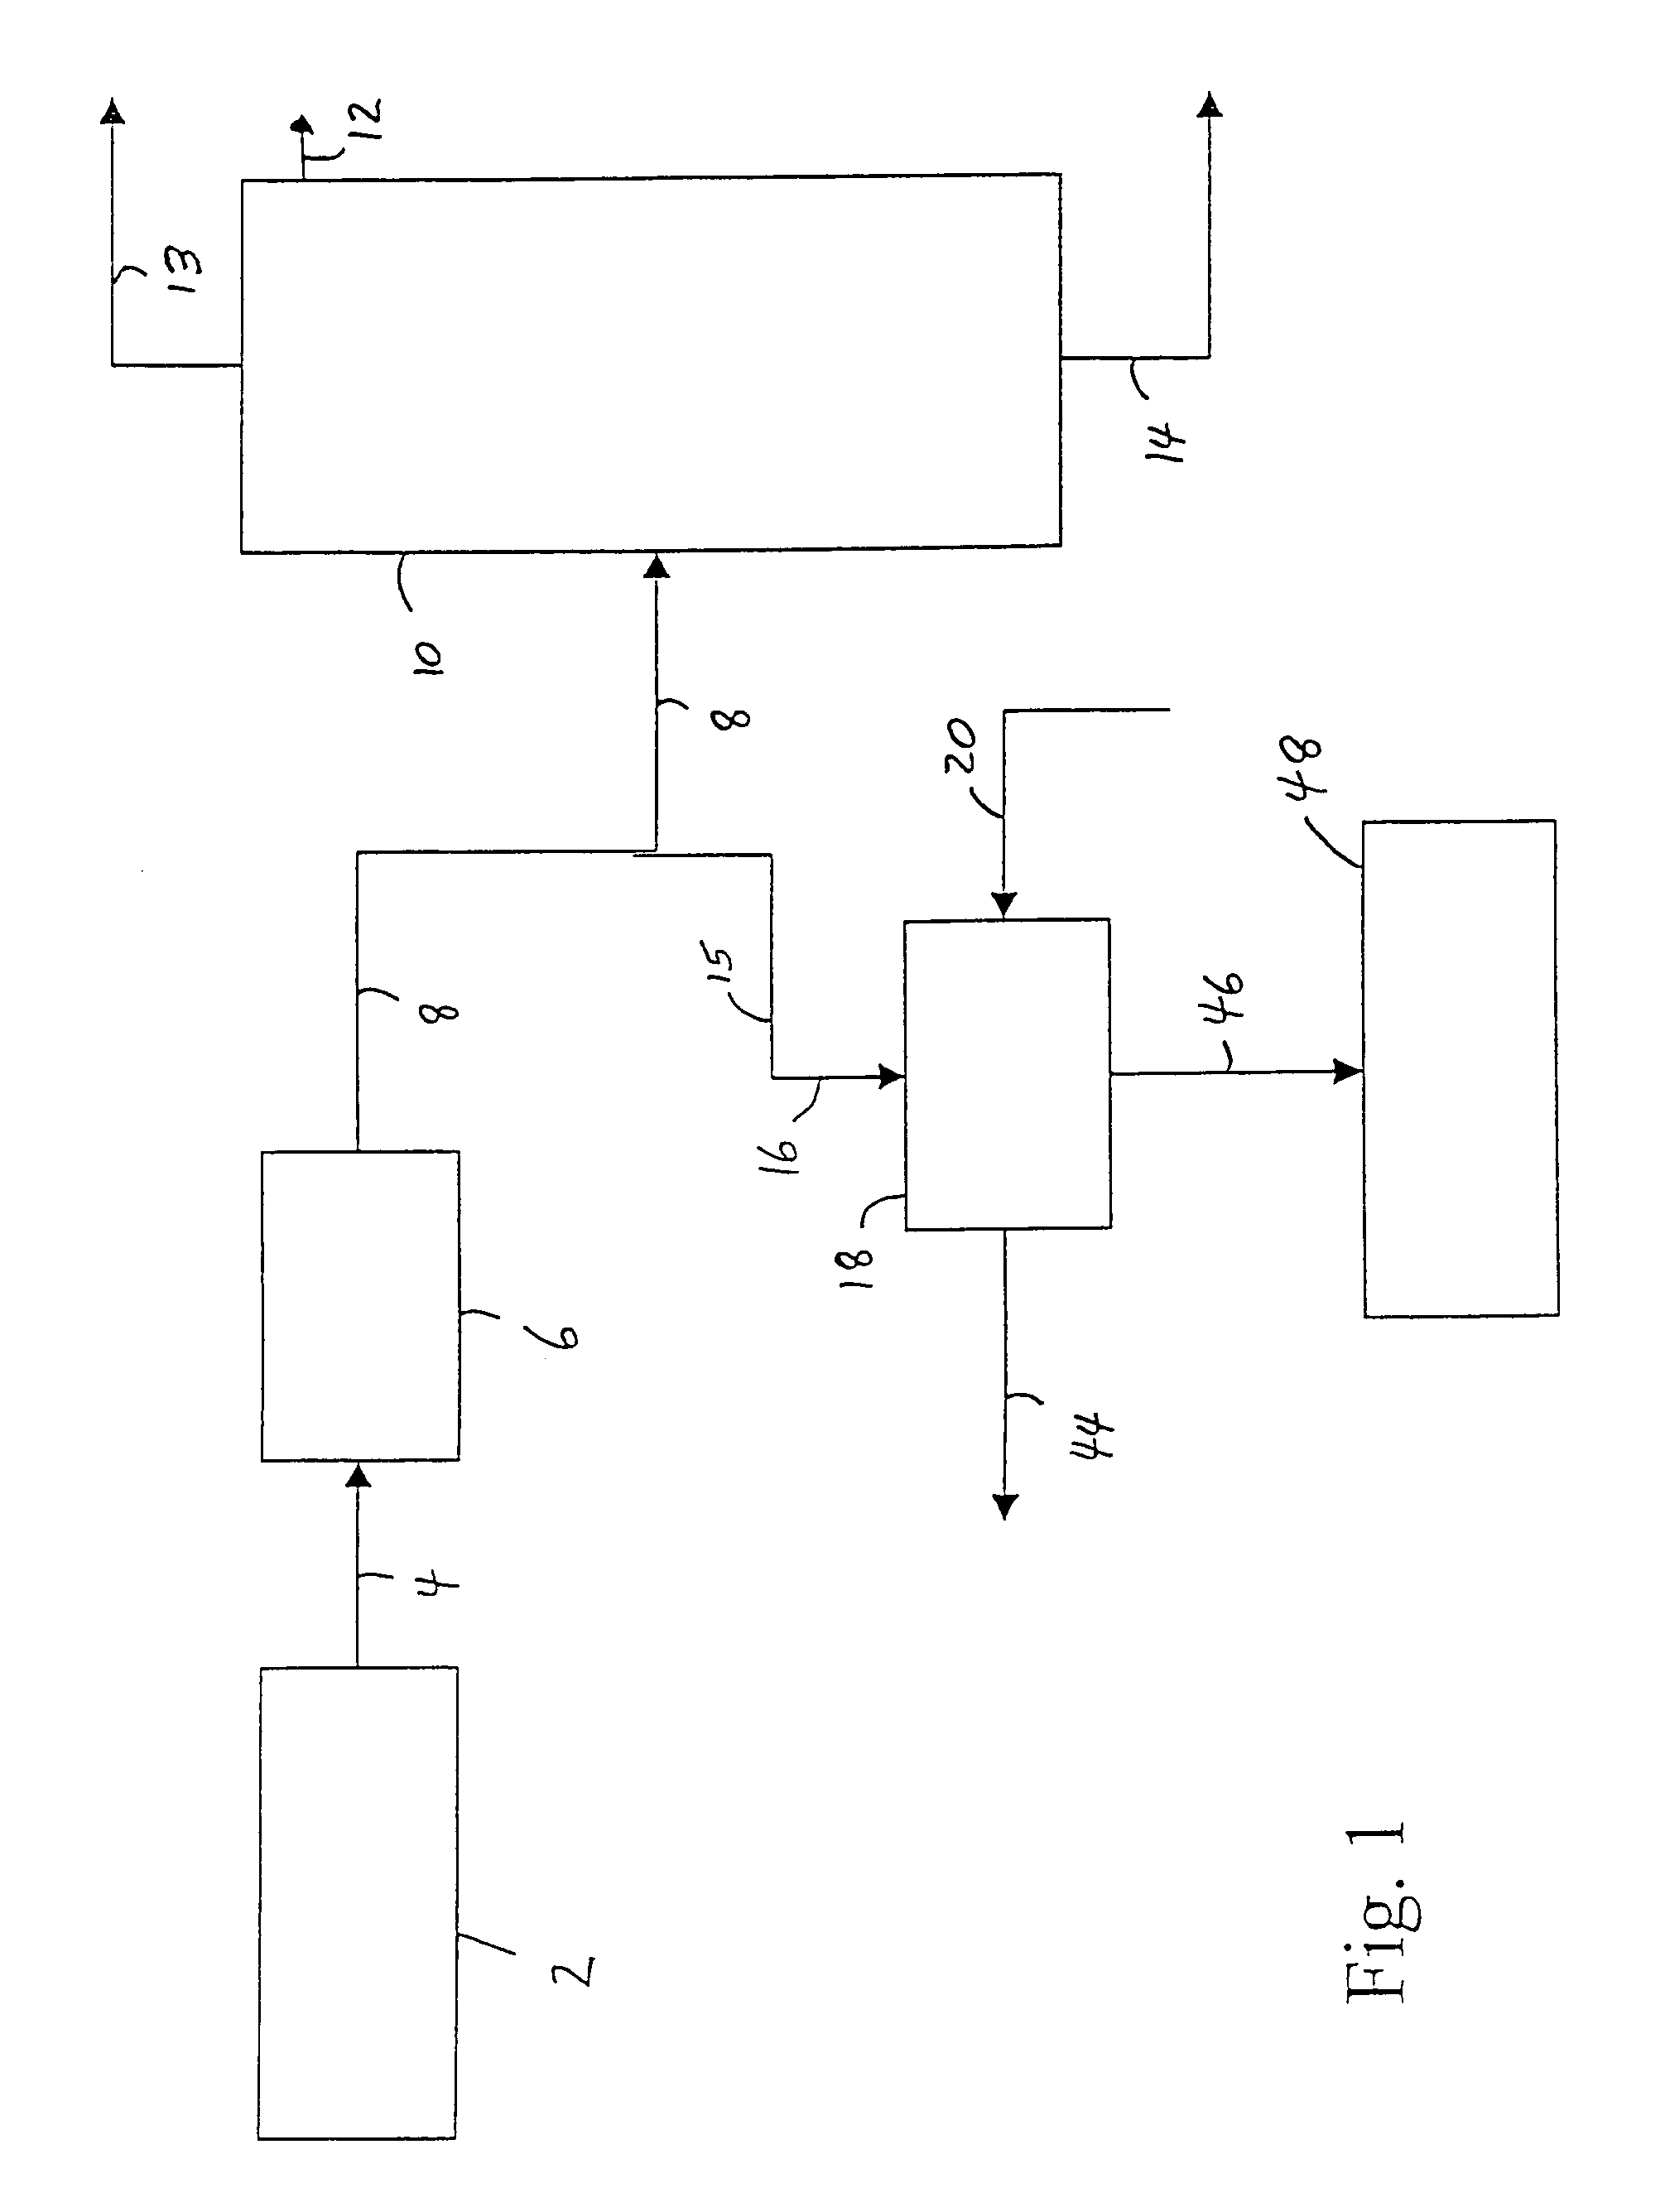 Process for production of propylene and ethylbenzene from dilute ethylene streams